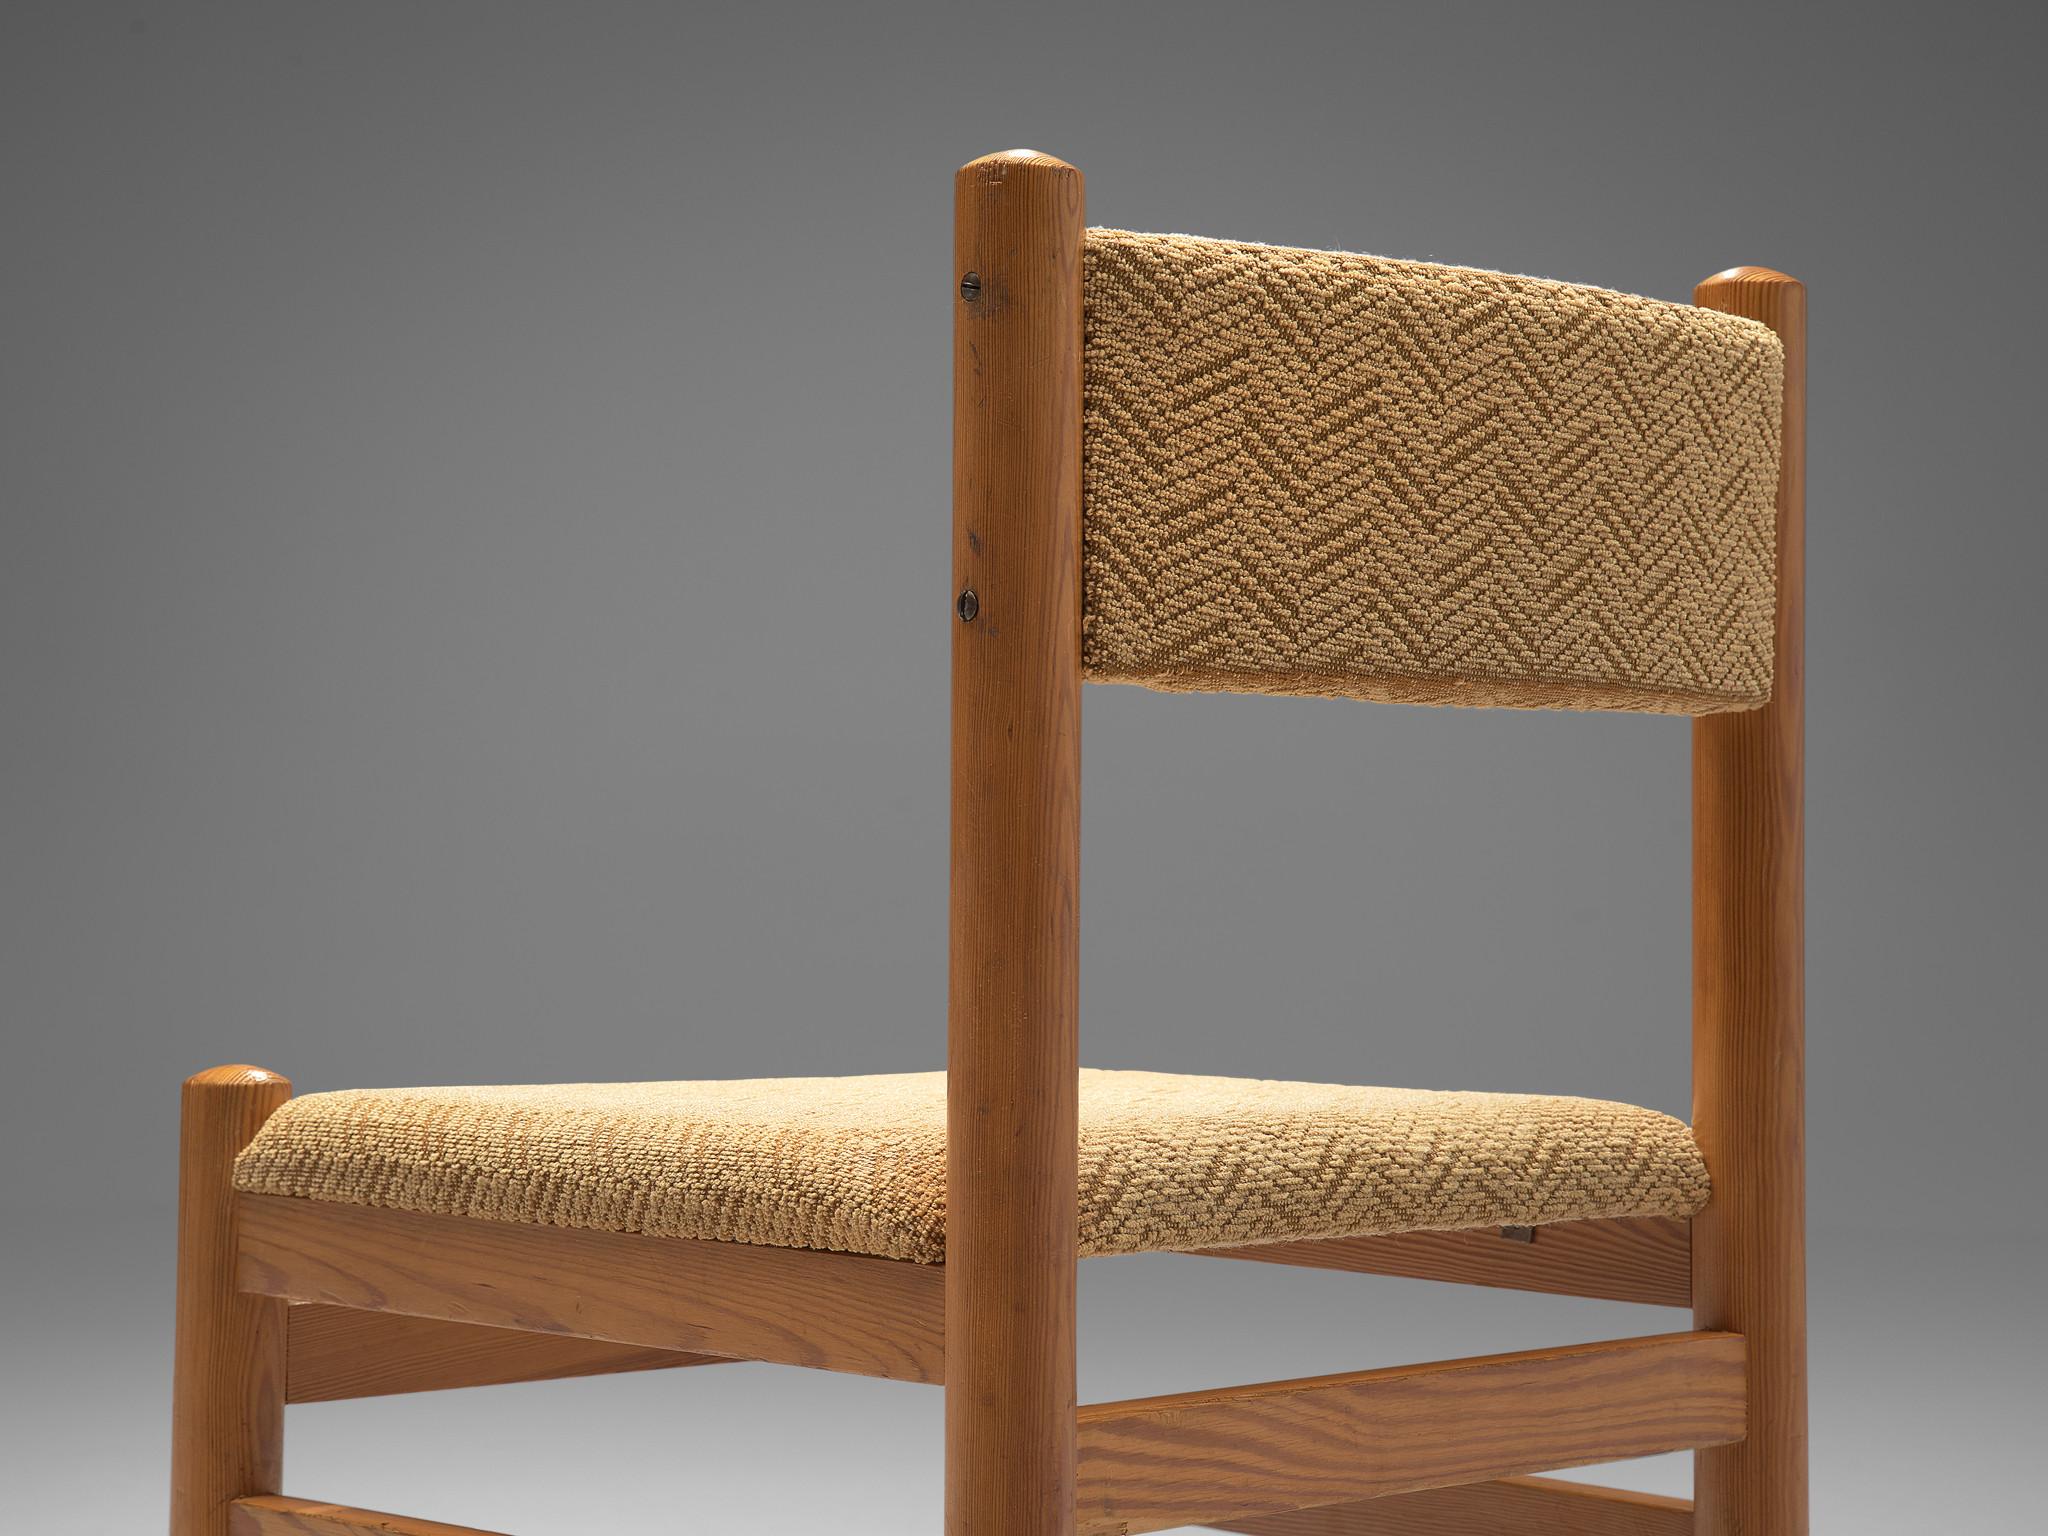 Czech Dining Chairs by TON in Pine and Beige Upholstery